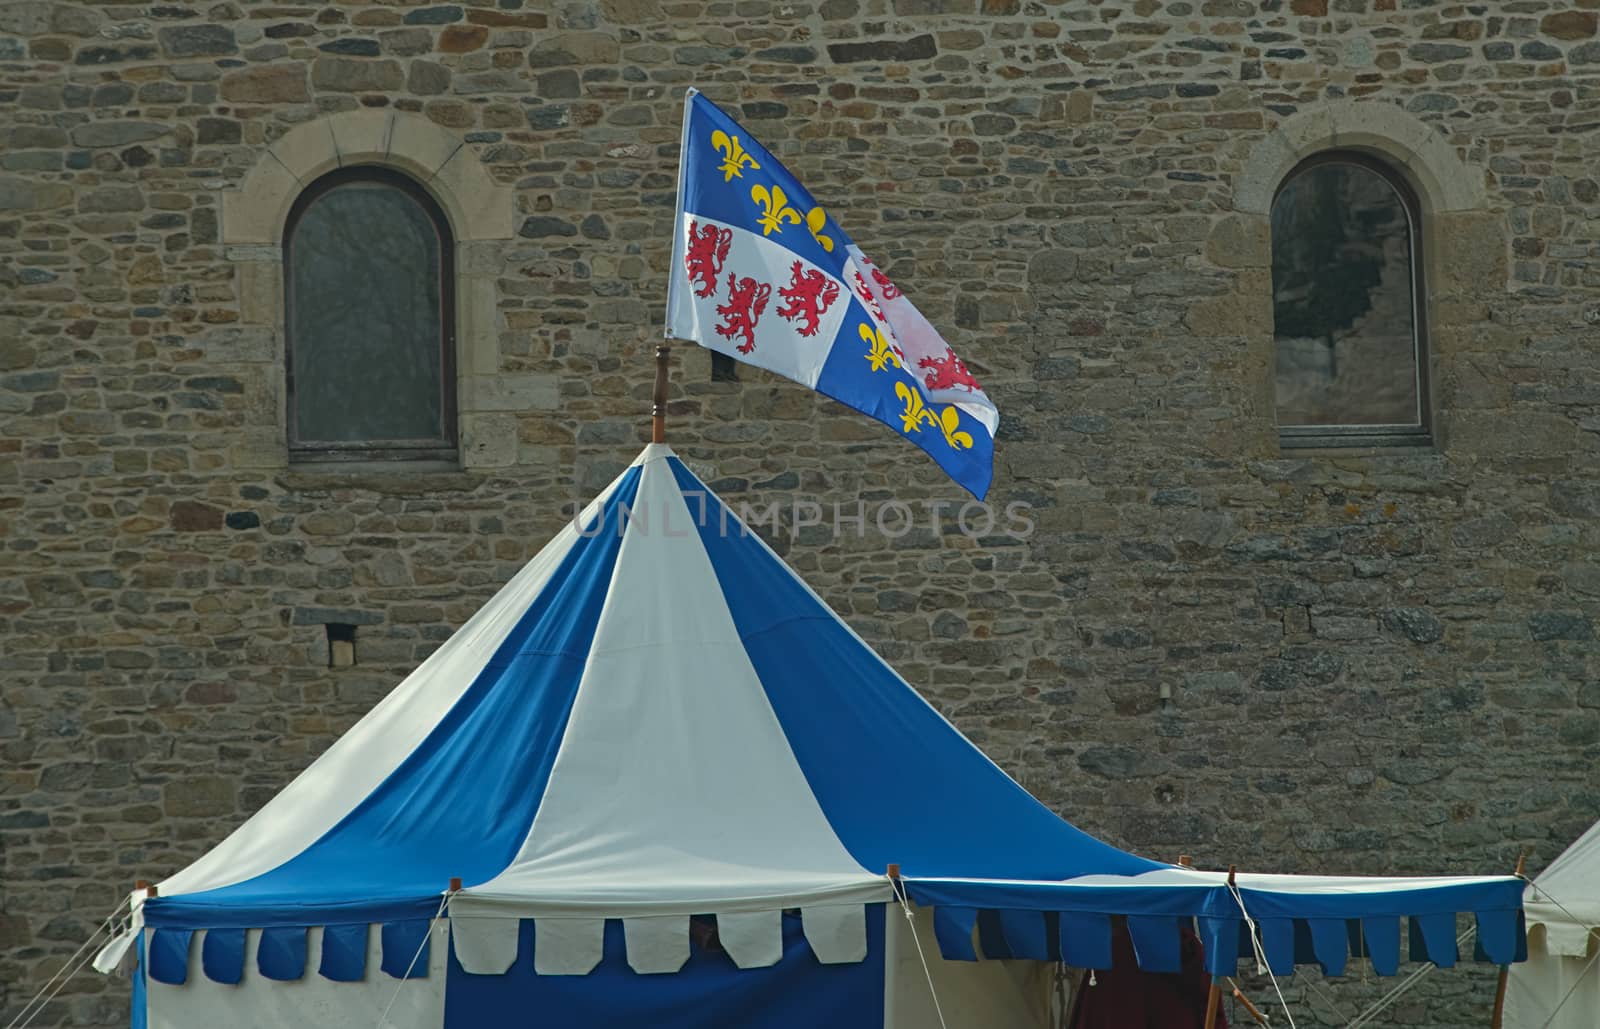 Top of medieval blue and white tent with normandy flag at top and castle in background